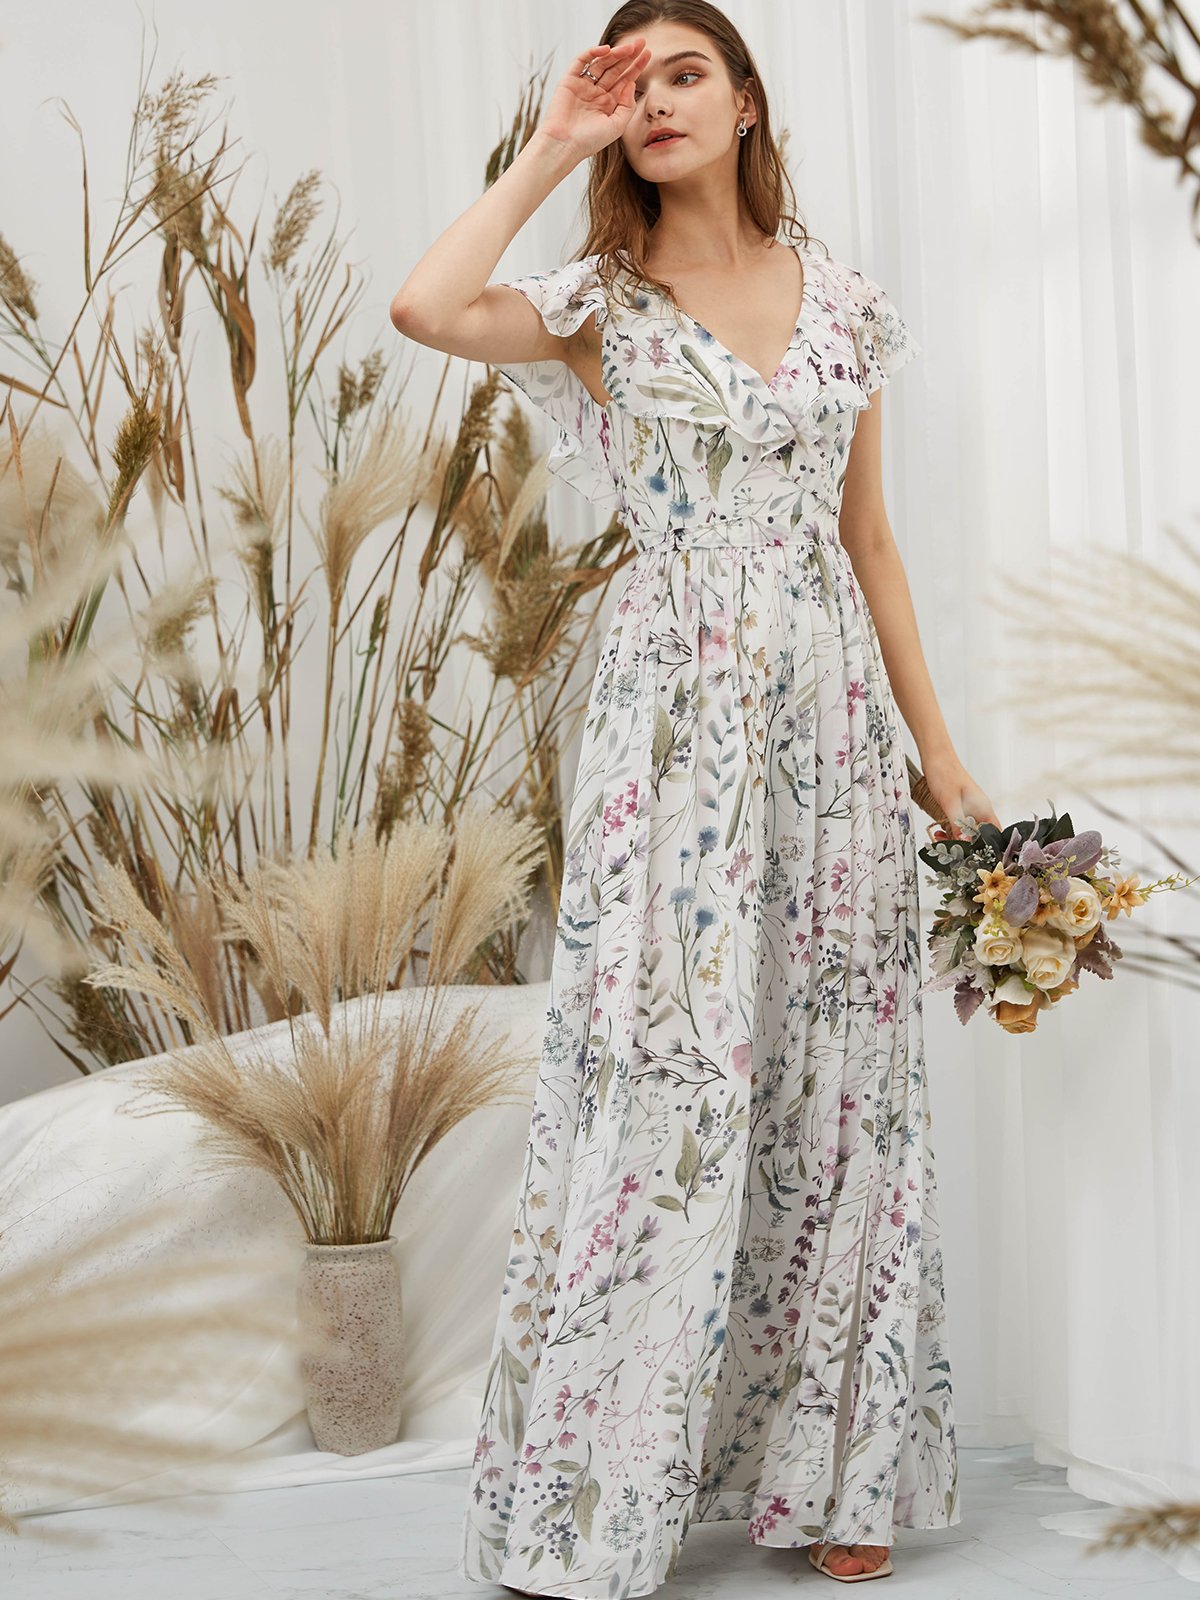 Cap Sleeves Chiffon V Neck Print Floral Ivory Floor Length Formal Evening Gown